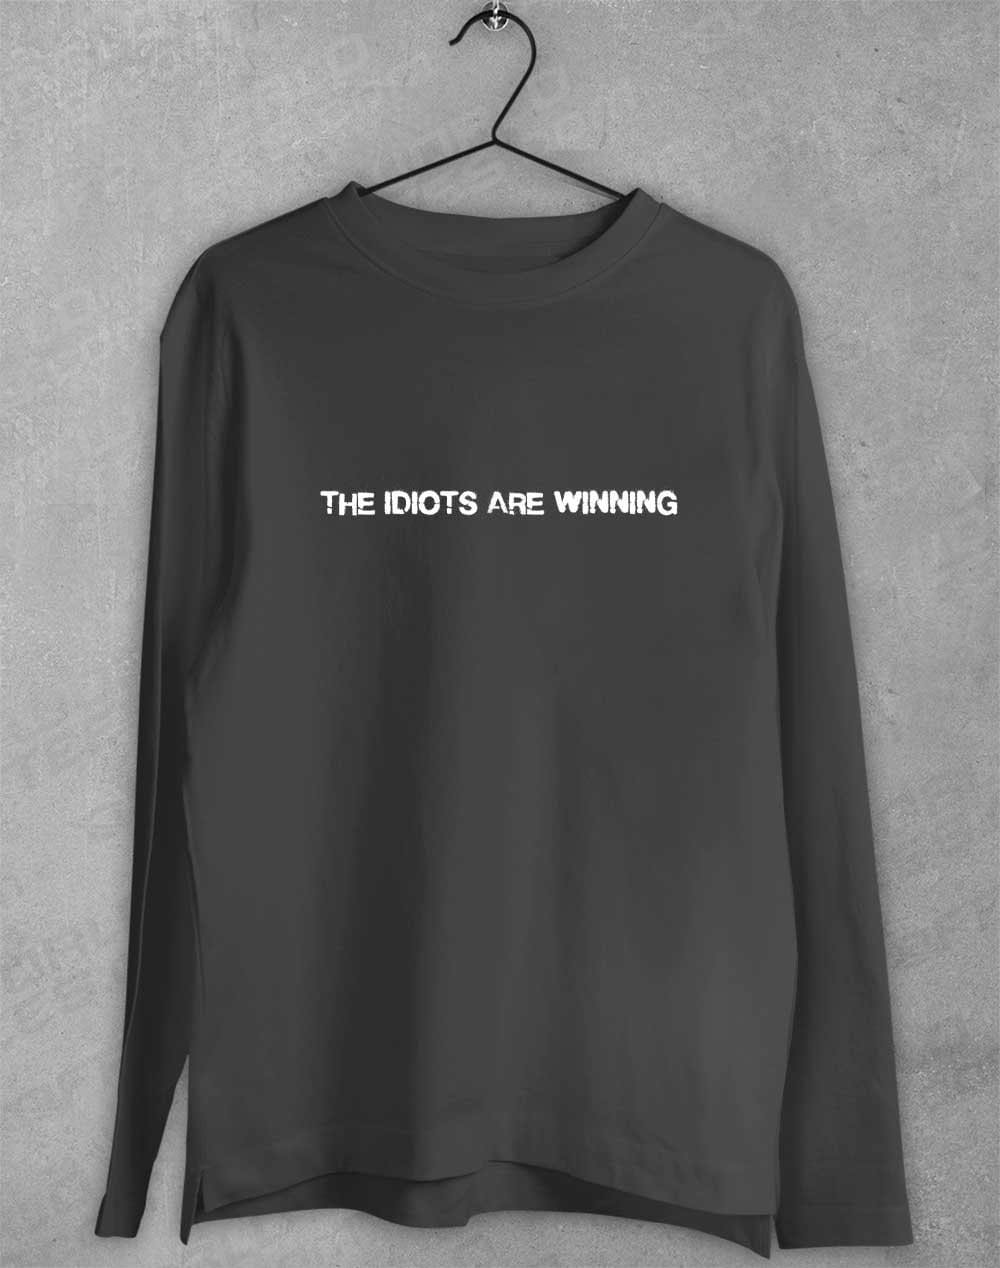 The Idiots Are Winning Long Sleeve T-Shirt S / Charcoal  - Off World Tees